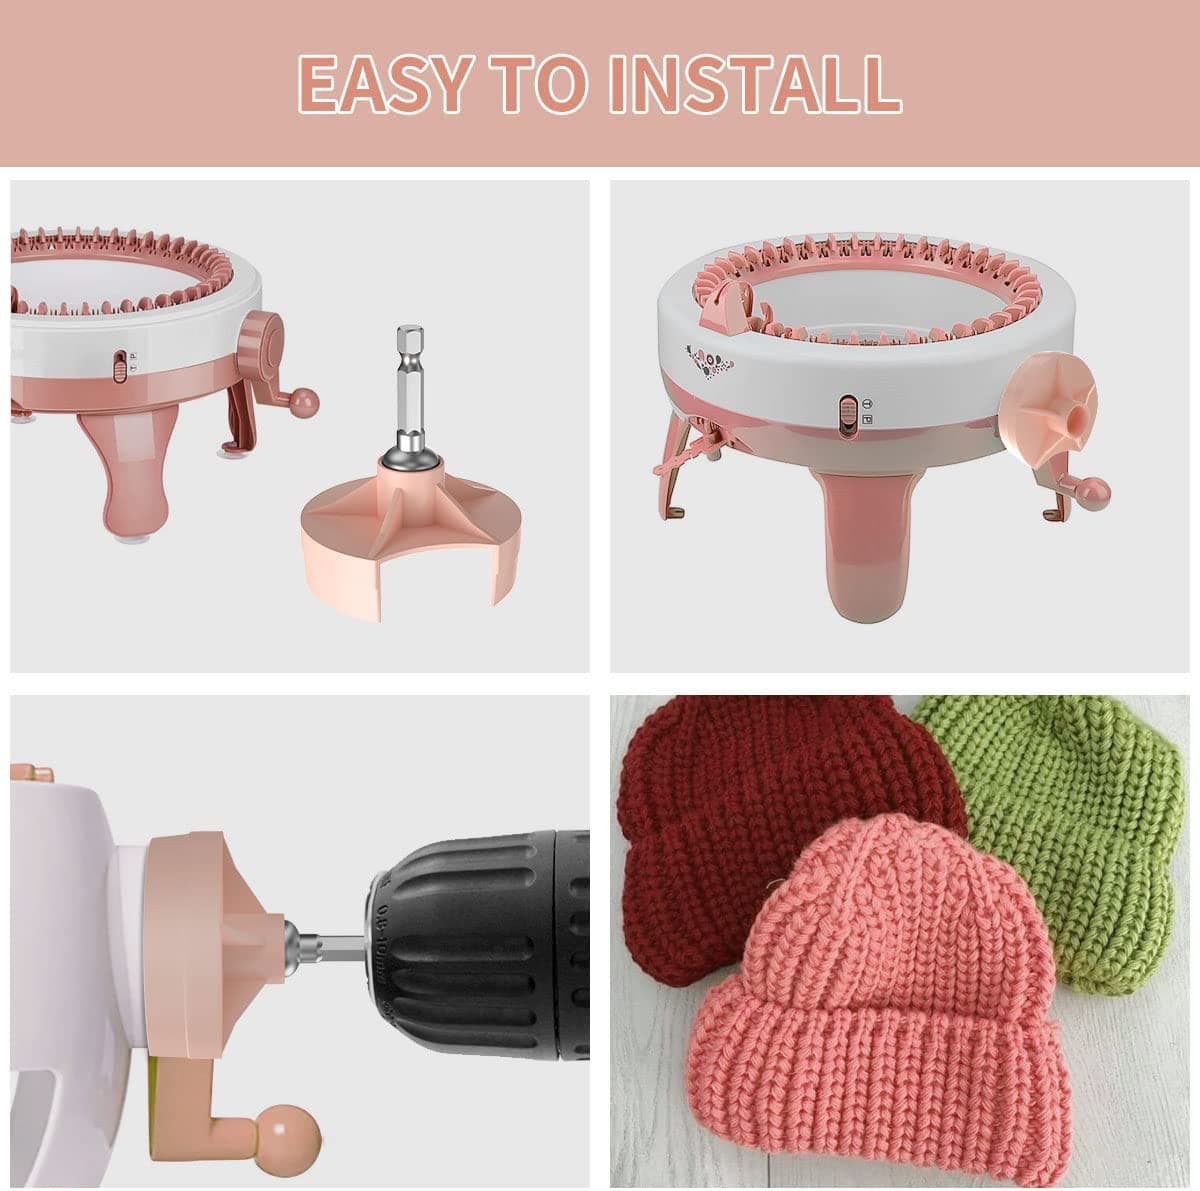 Knitting Machine Adapter Knitting Machine Adapter for Drill with Hex